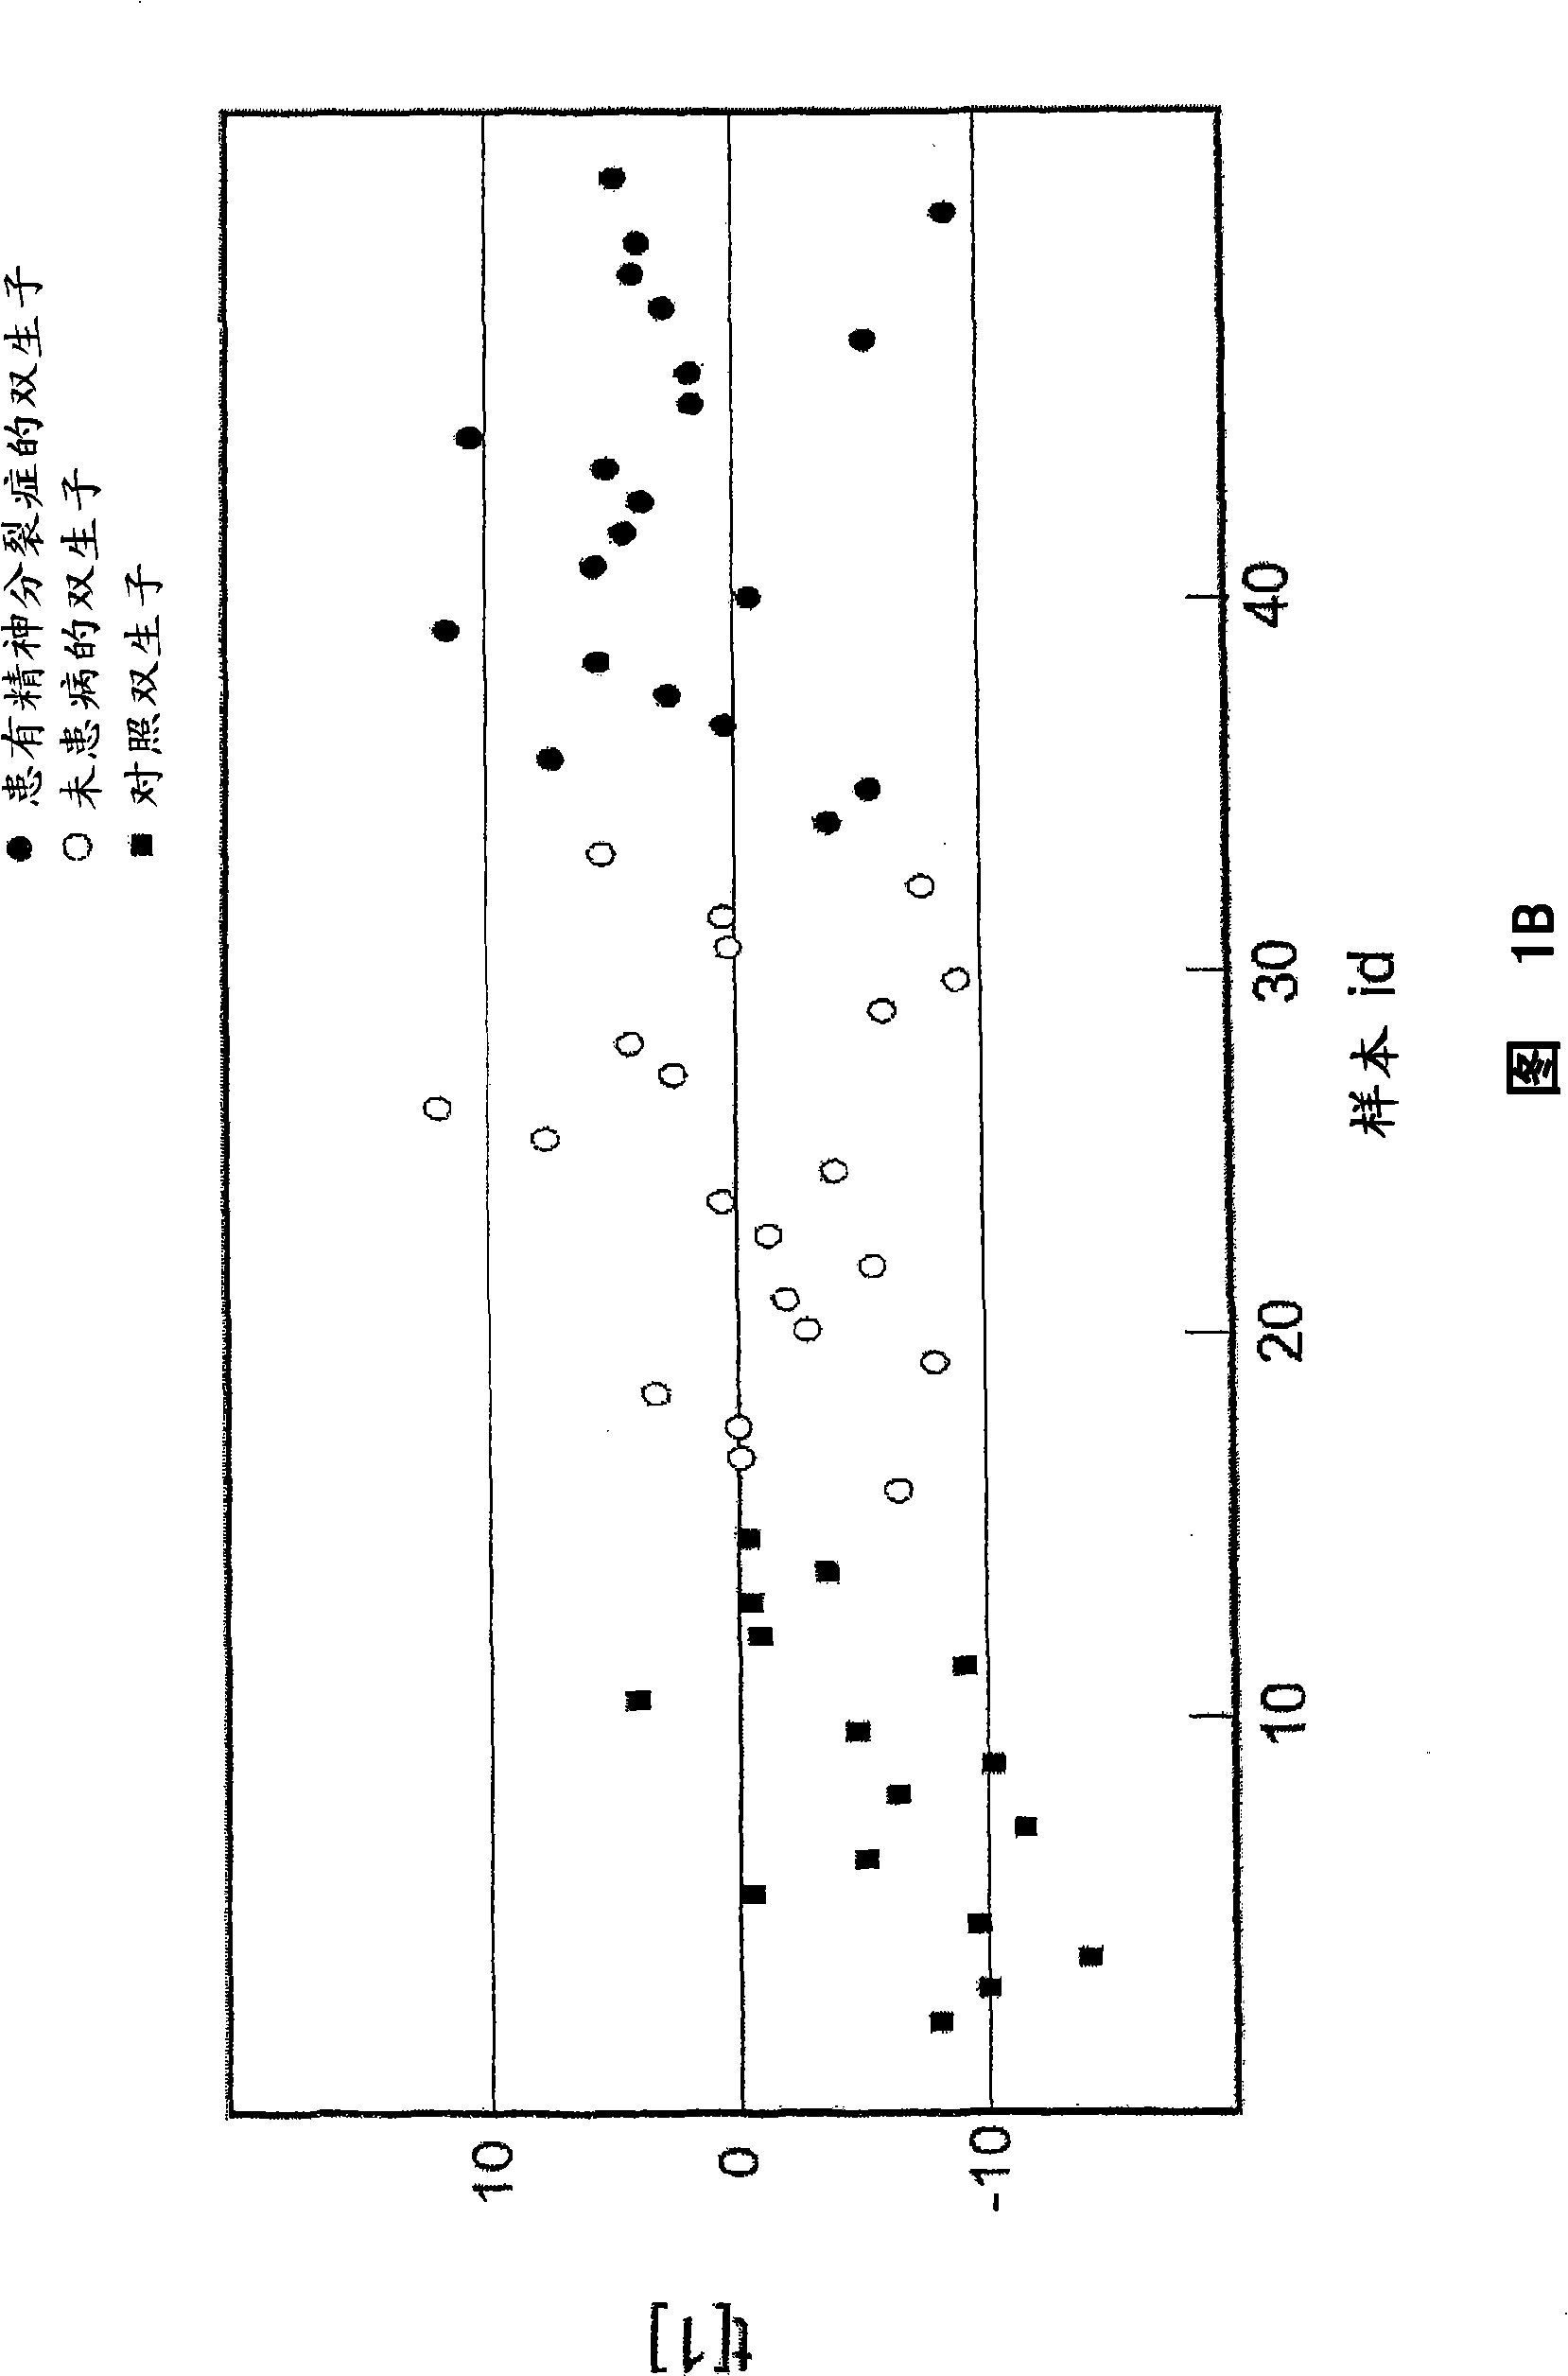 Methods and biomarkers for diagnosing and monitoring psychotic disorders such as schizophrenia